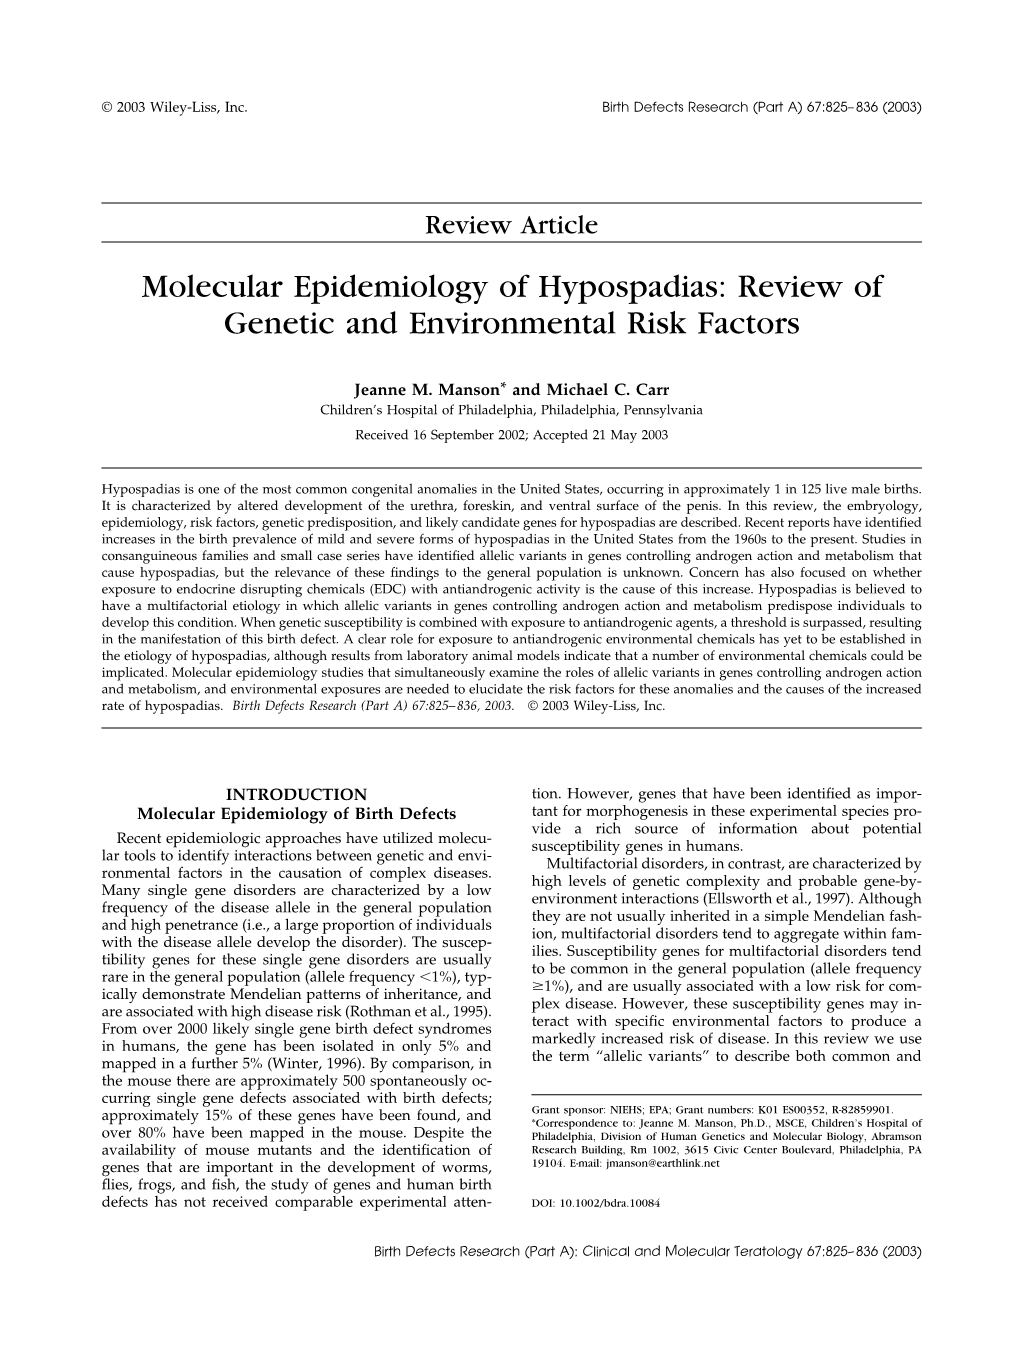 Molecular Epidemiology of Hypospadias: Review of Genetic and Environmental Risk Factors